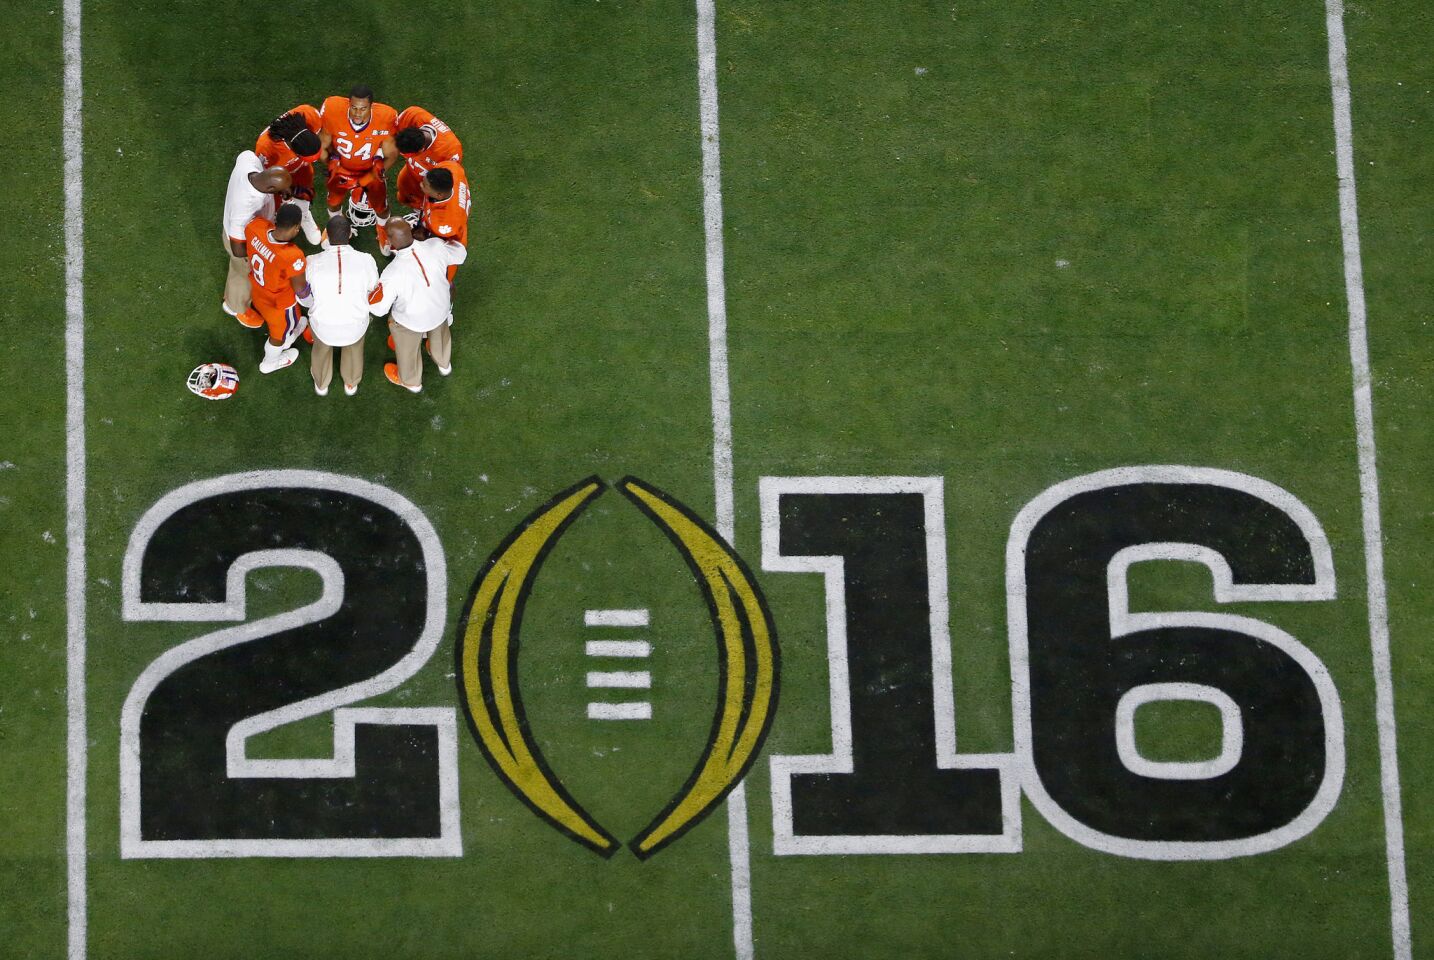 Clemson players huddle before the 2016 College Football Playoff championship game against Alabama.